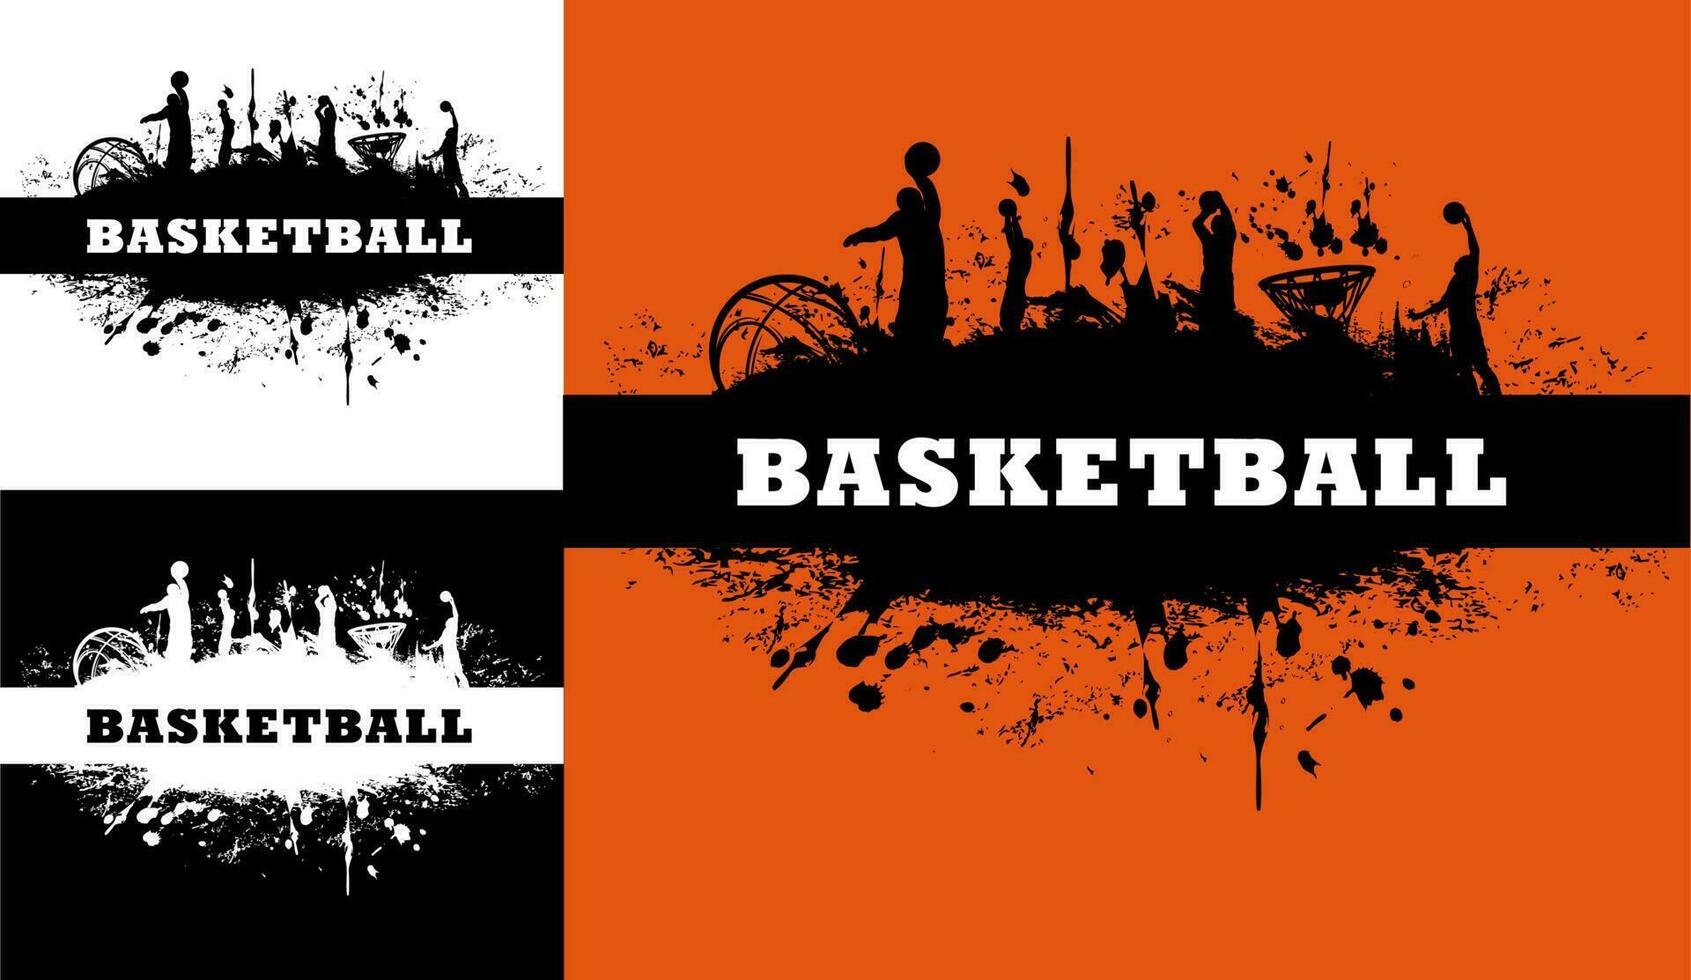 Basketball or streetball game grunge background vector